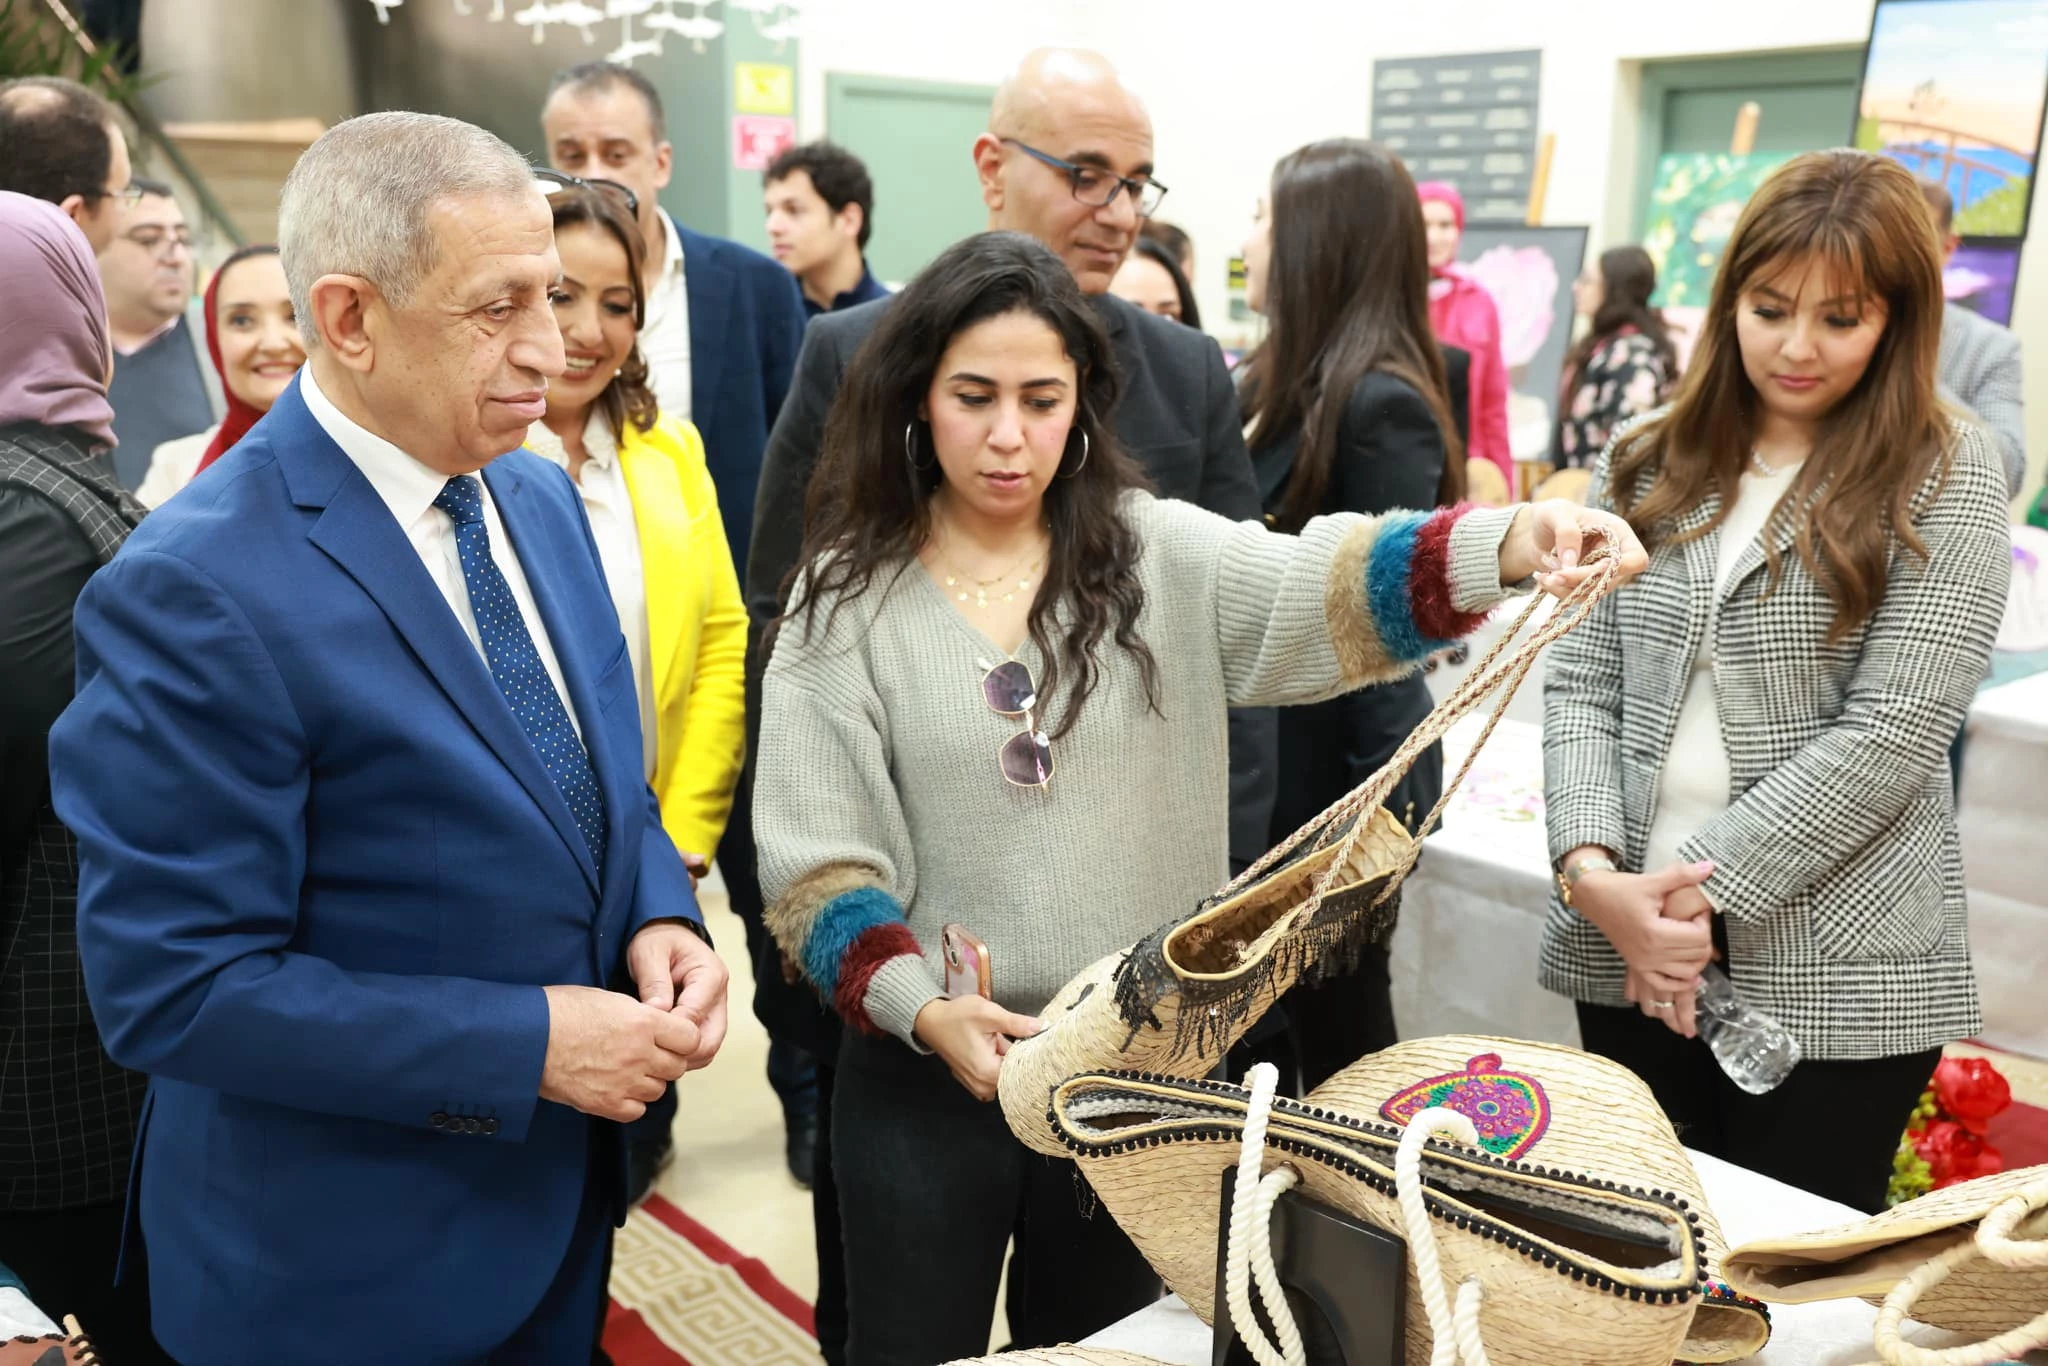 His Excellency Professor Dr., President of the Arab Academy for Science, Technology and Maritime Transport, opened the closing ceremony of activities and the exhibition of fine arts and handicrafts for students of the Faculties of Management, Technology, Language and Media in Miami on: 1/4/20247